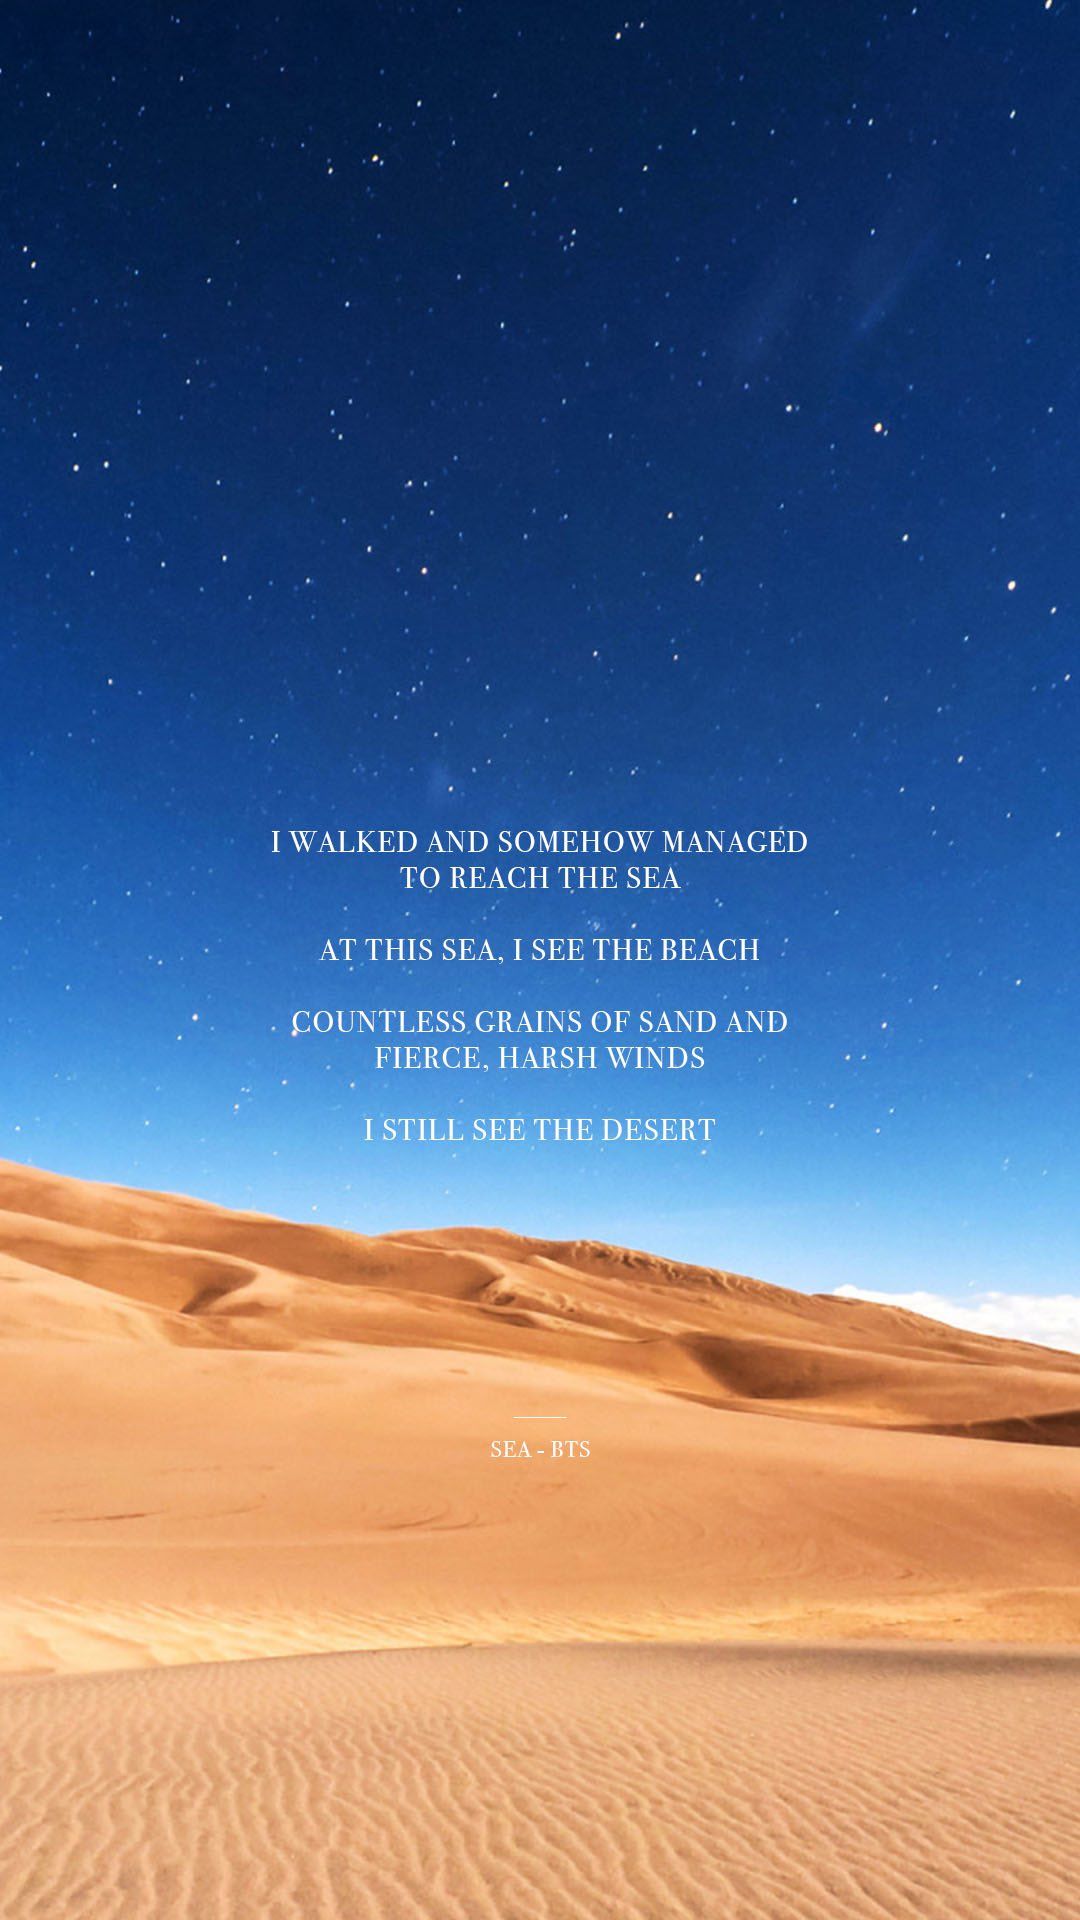 Iphone wallpaper with quote from the song sea by bts - Desert